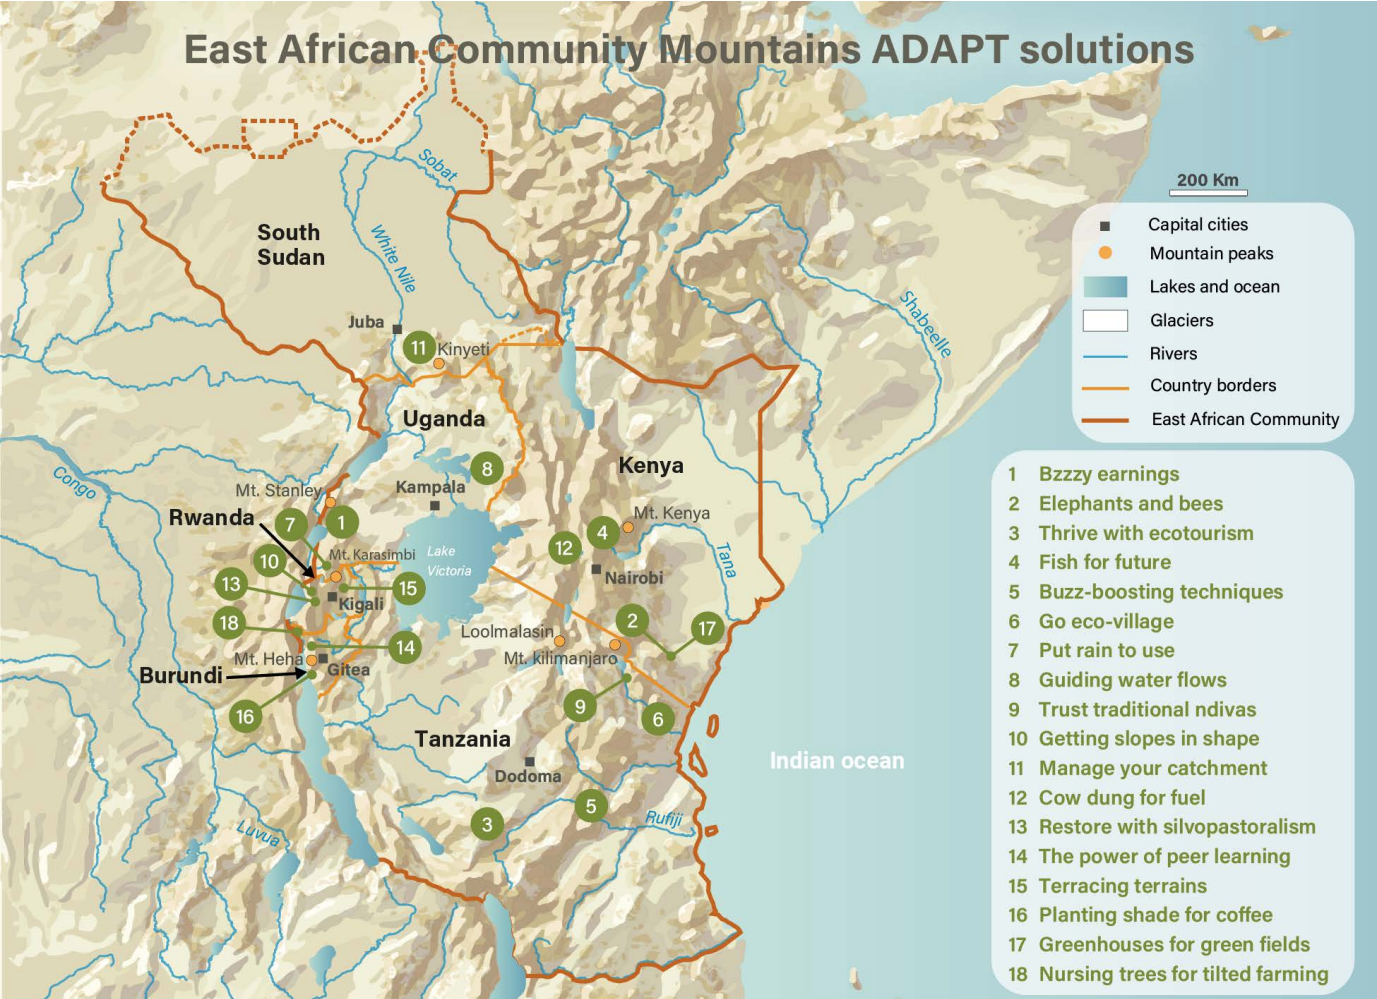 Map of solutions featured in the booklet